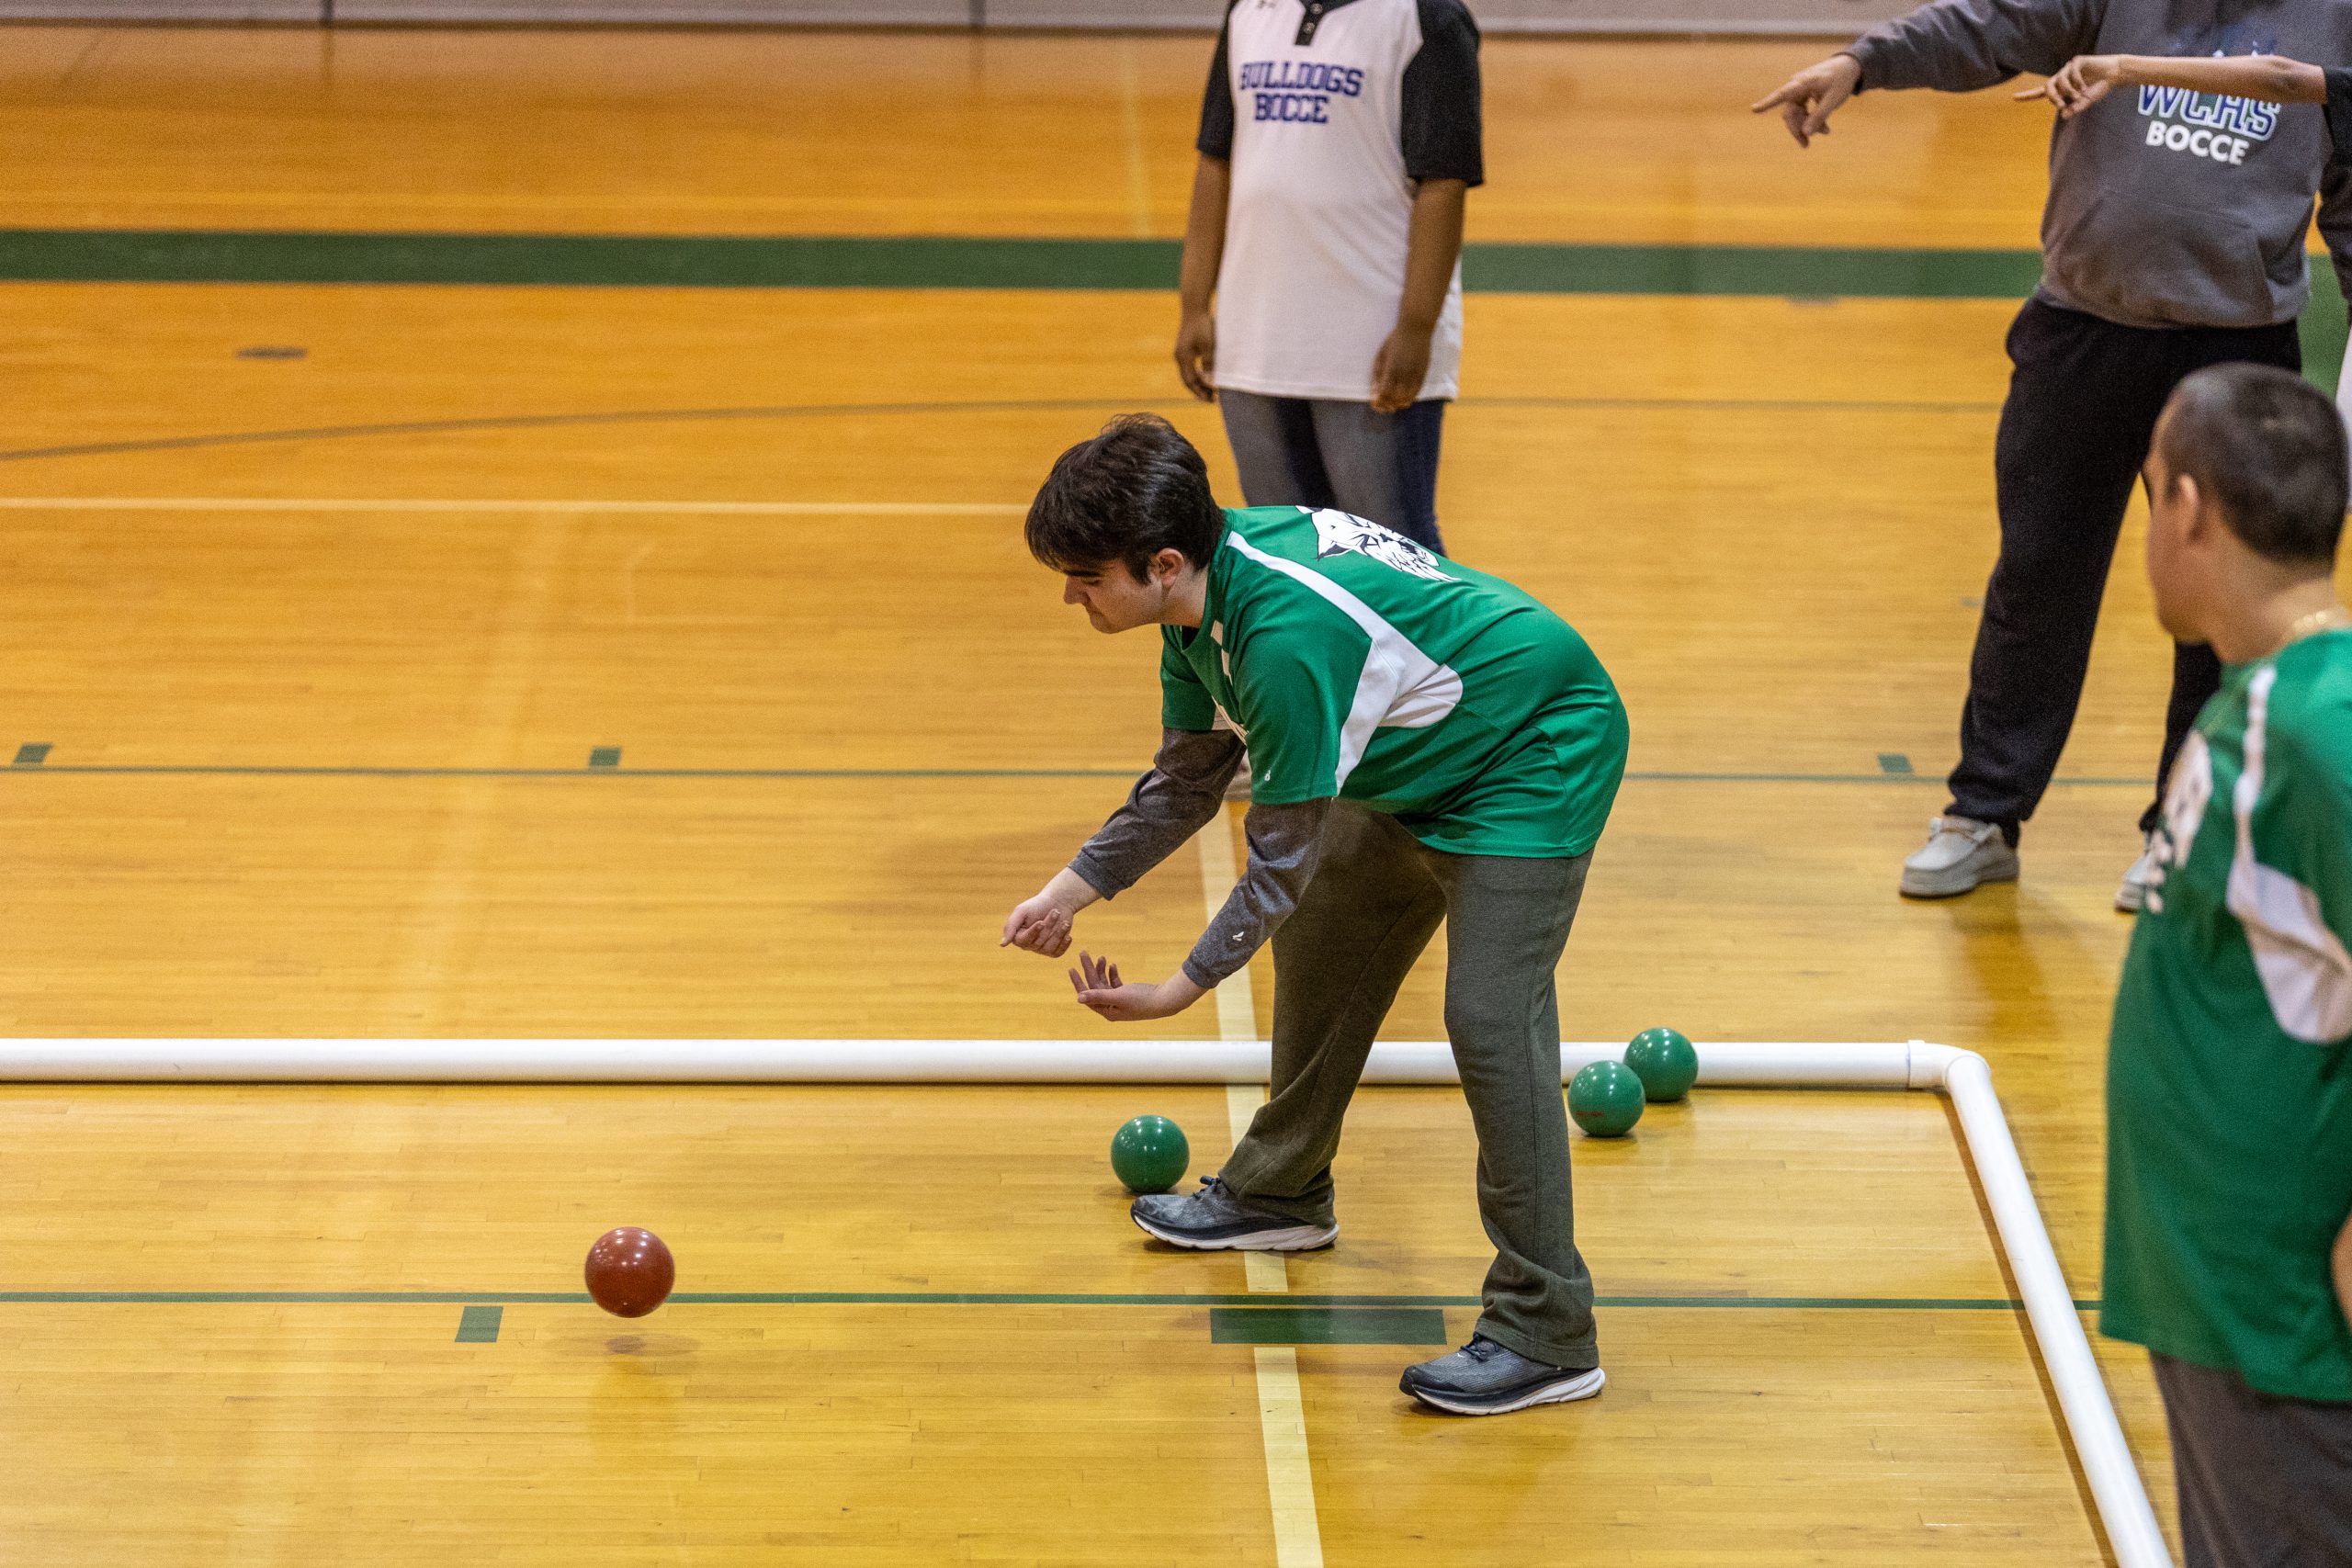 Bocce+plays+final+game+of+the+season